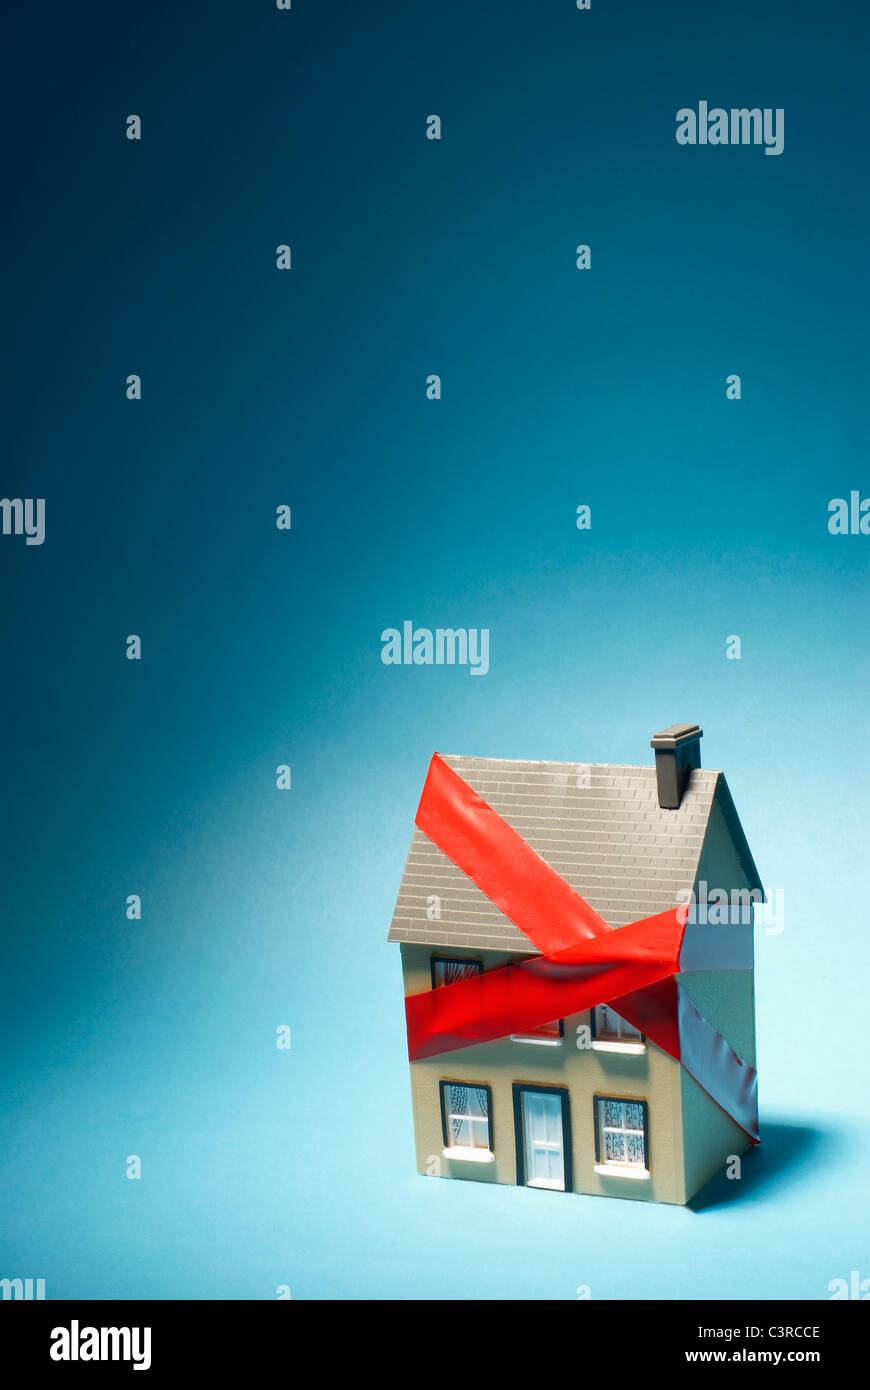 Model house with red tape around it Stock Photo